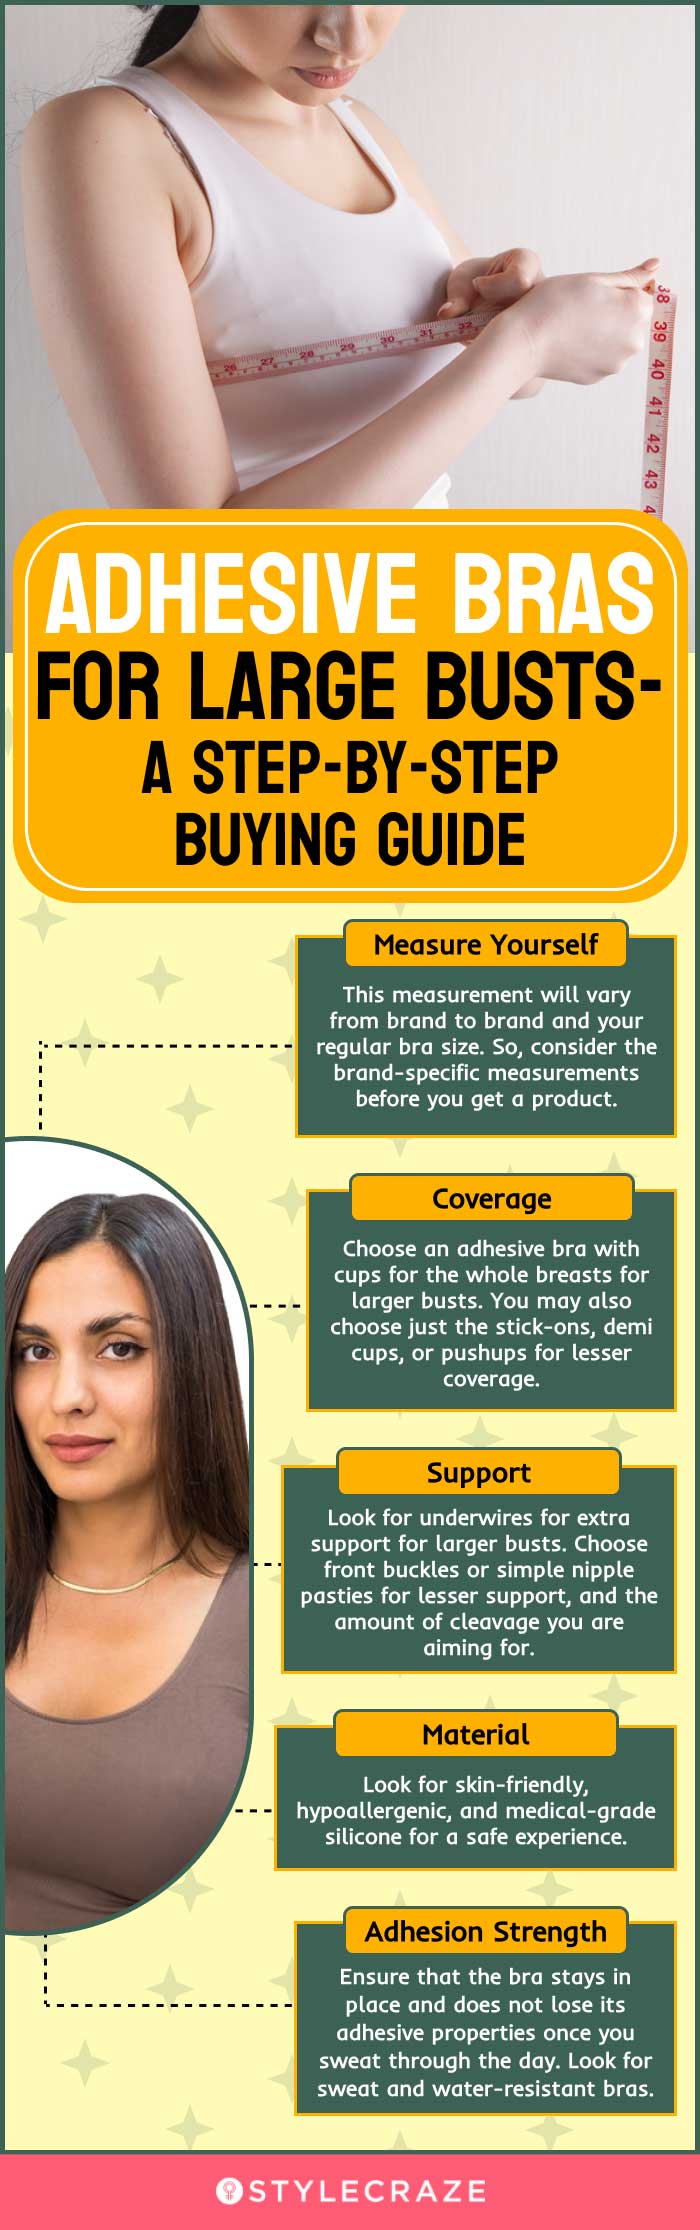 Adhesive Bra For Large Bust — A Step-By-Step Buying Guide (infographic)